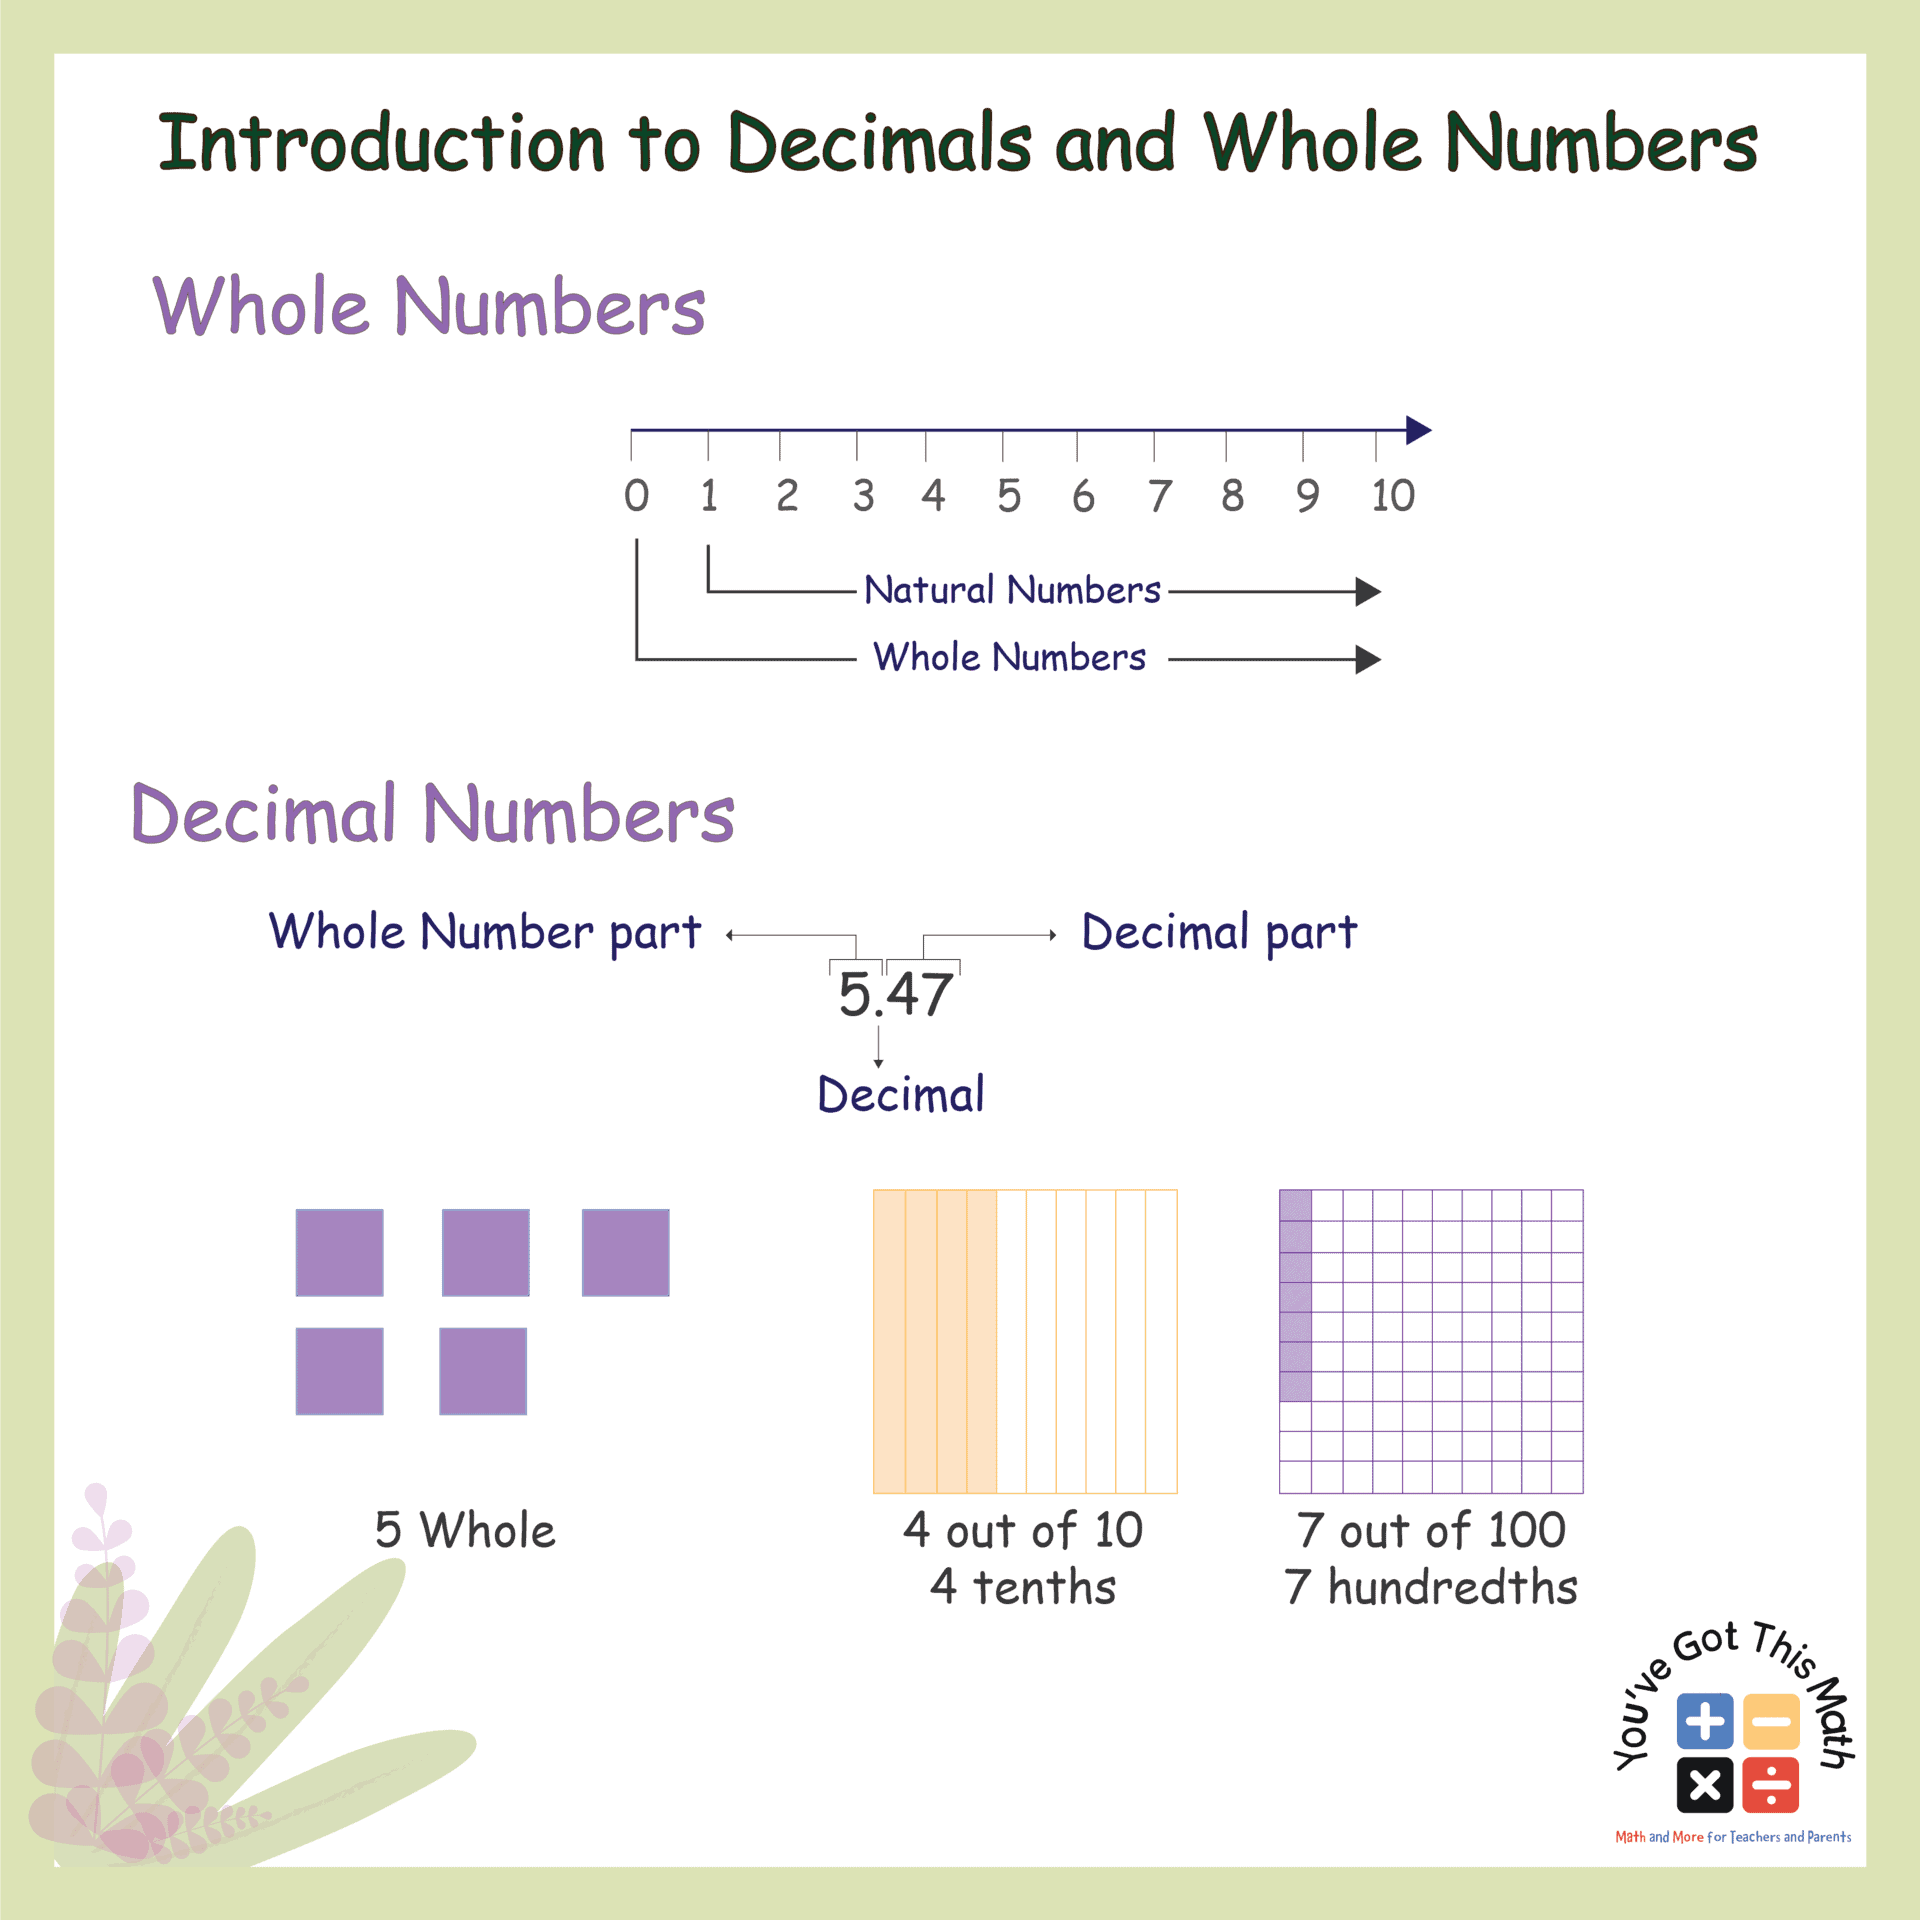 Introduction to Decimals and Whole Numbers with Differences-01-01